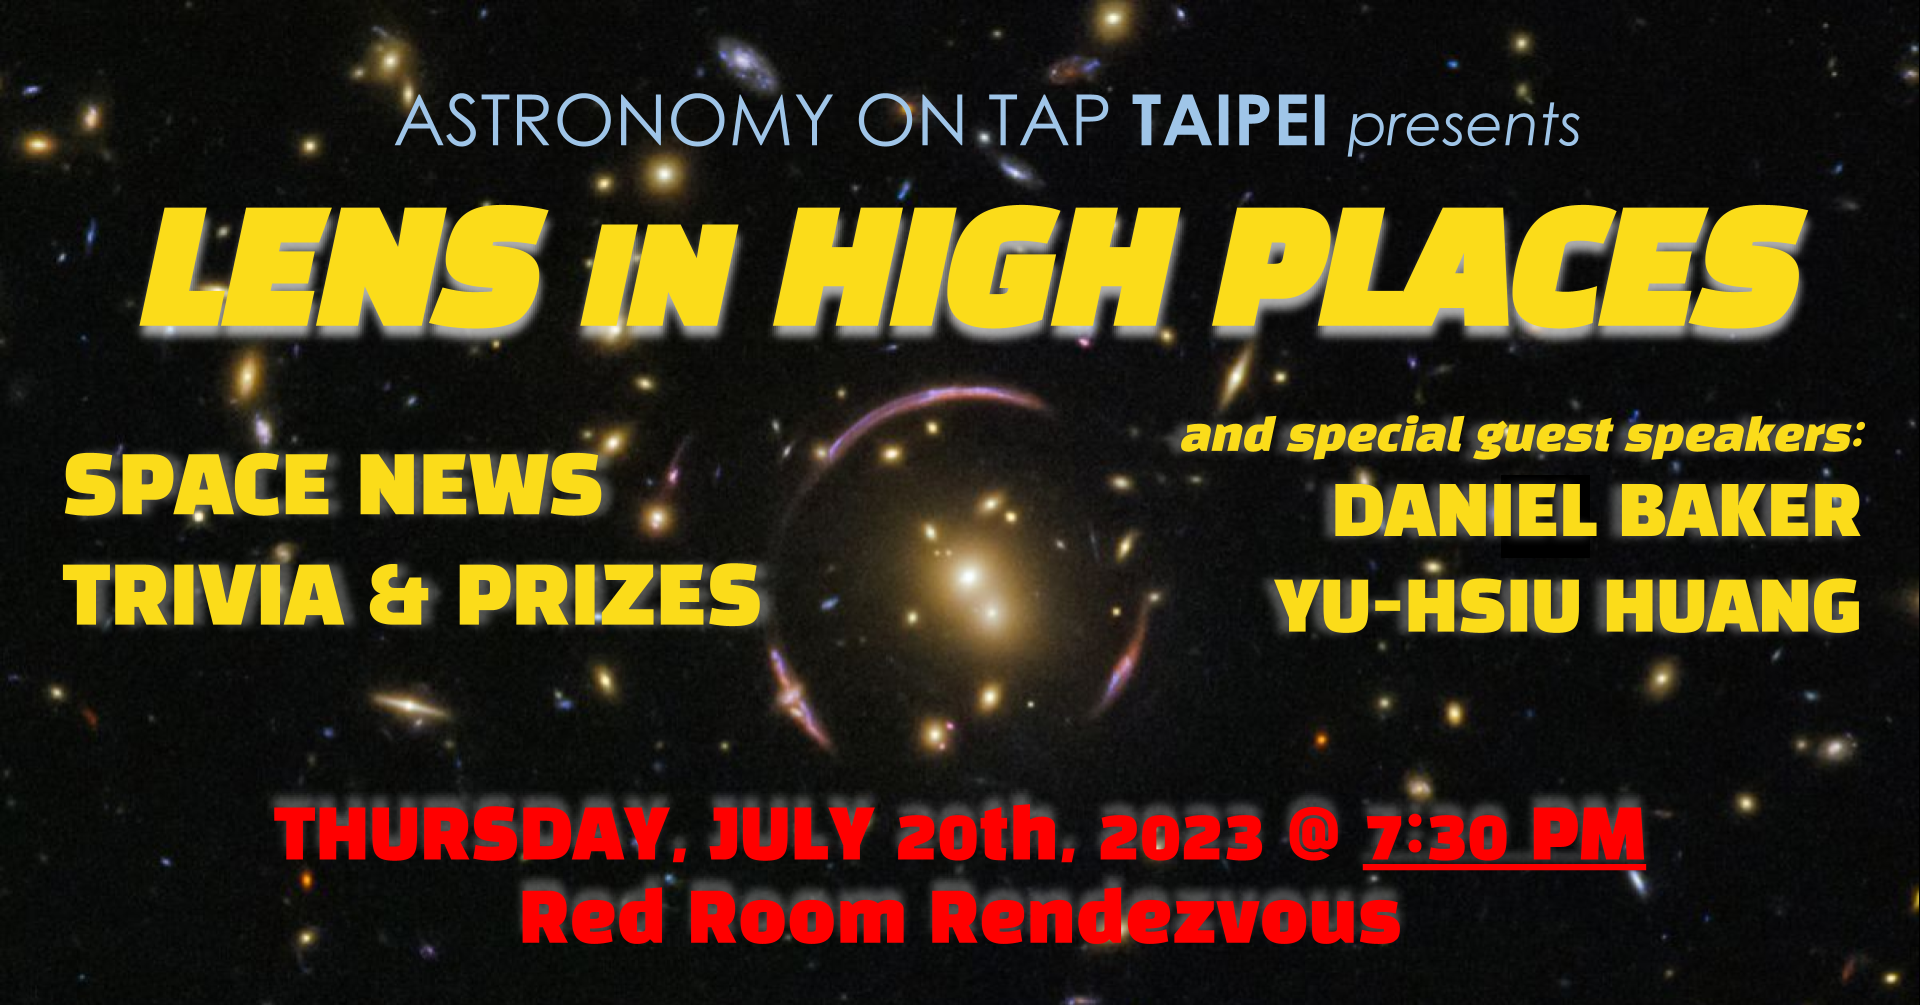 AoT Taipei presents: Lenses in High Places. Join us at 19:30 pm on 20th July at Red Room Rendezvous in Taipei.